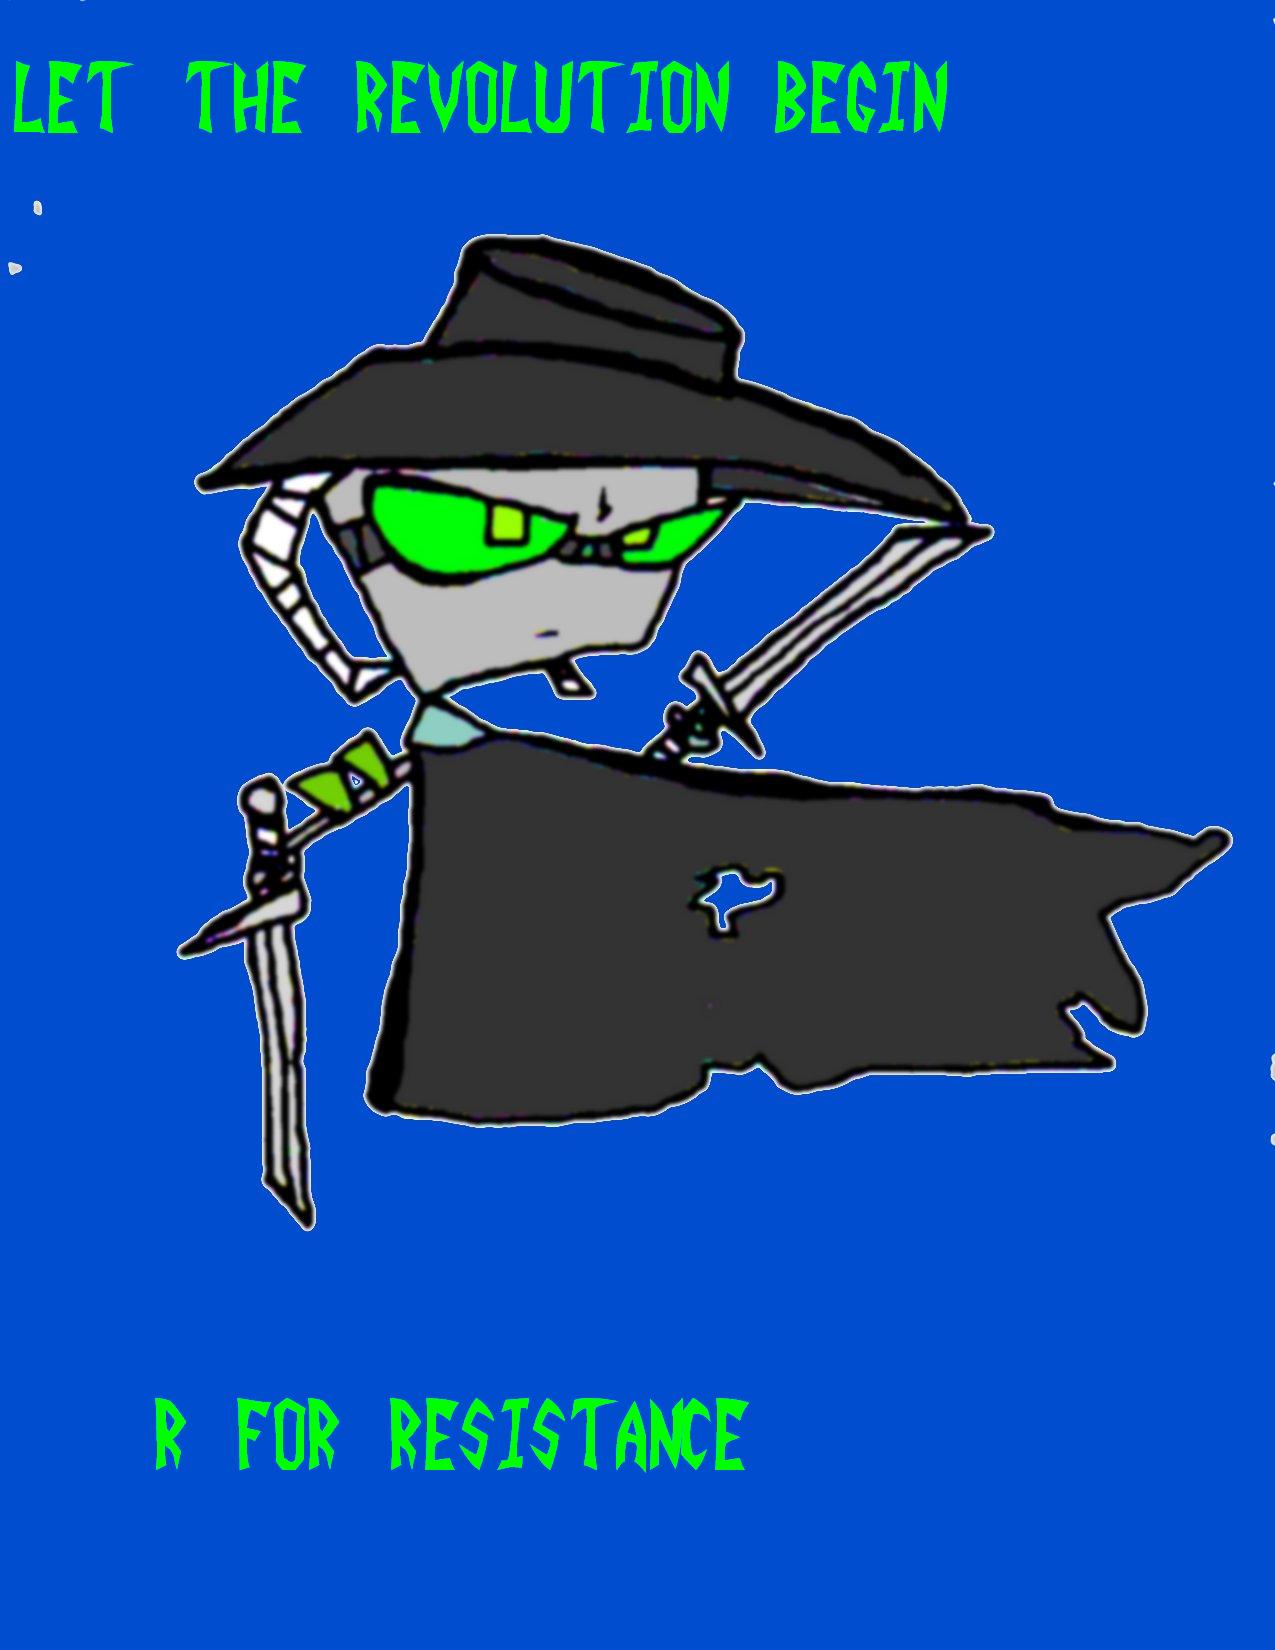 R for Resistance by ardamess